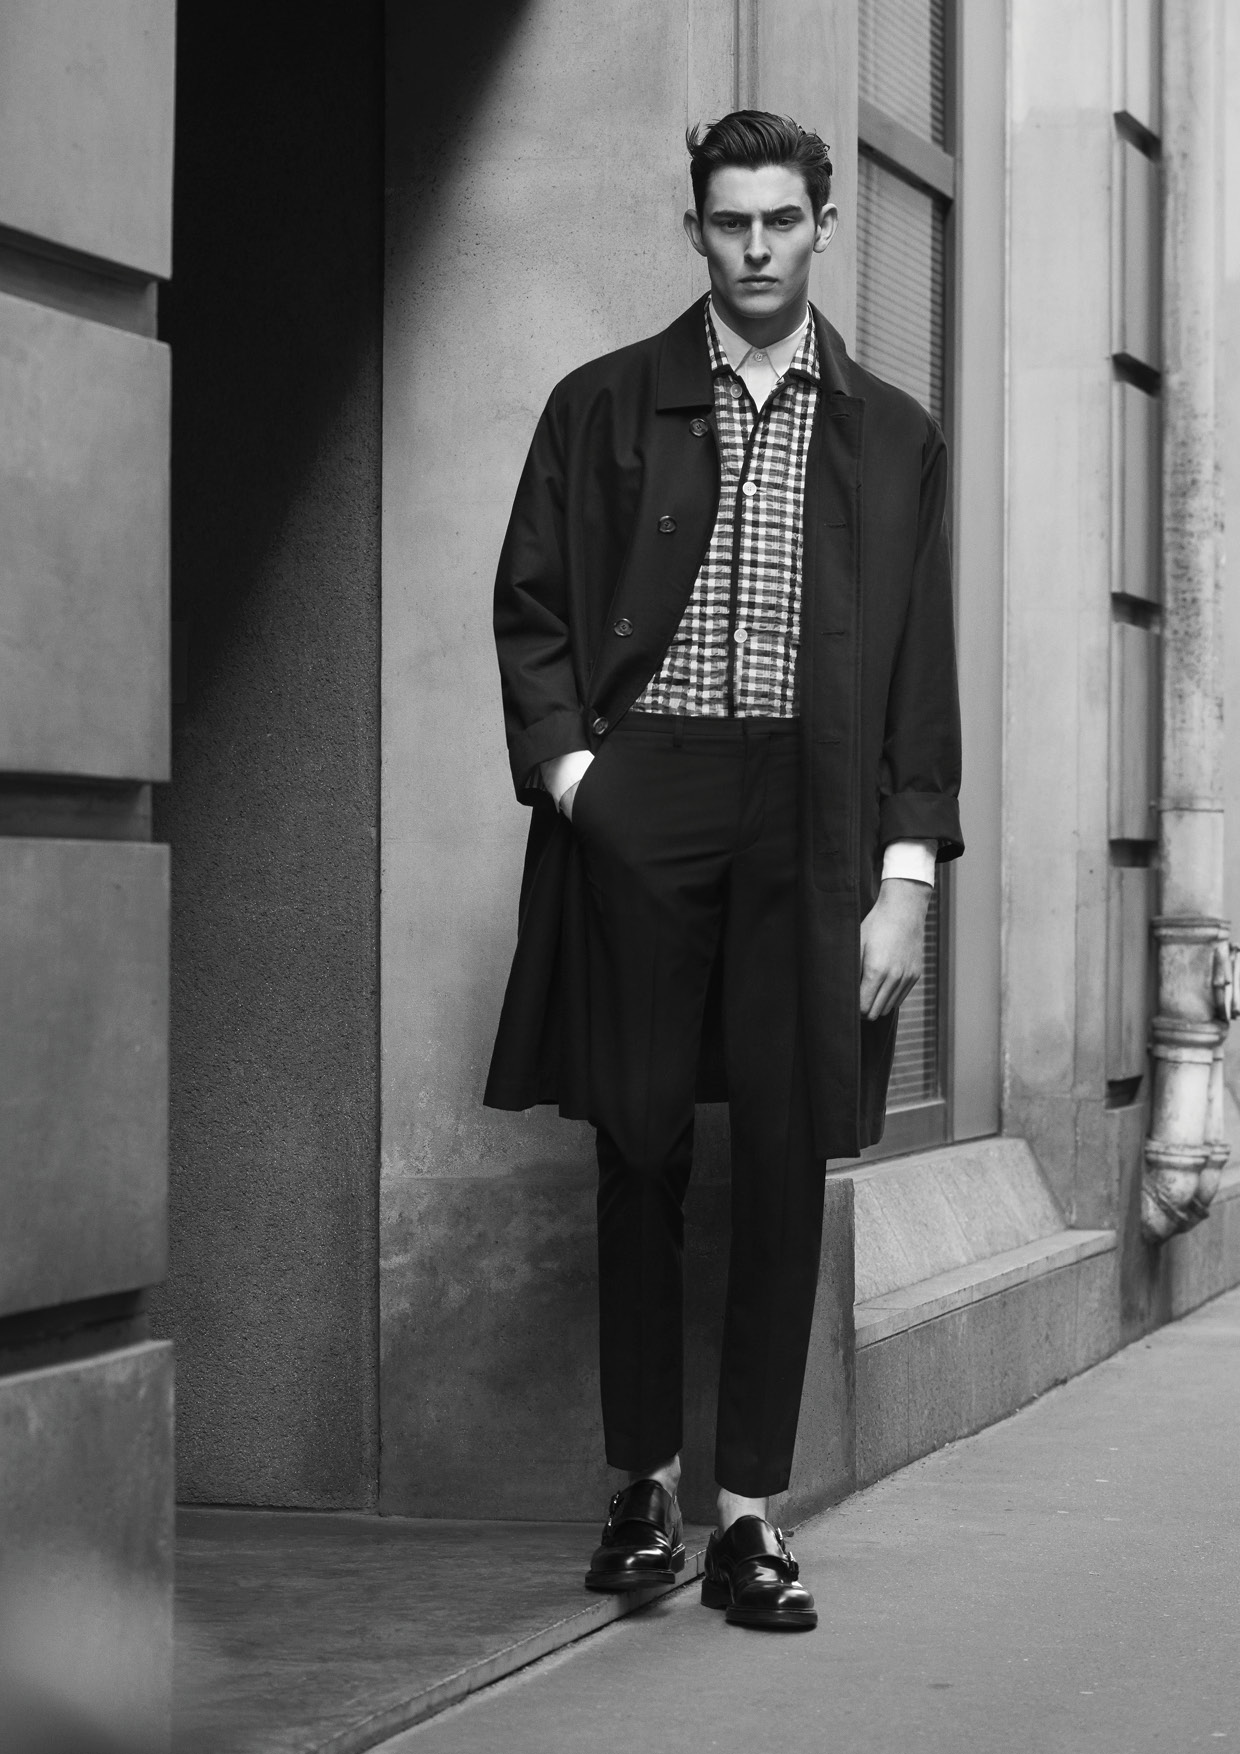 Rhys Pickering at Bananas by Laurent Humbert for CLIENT #13 | Client ...